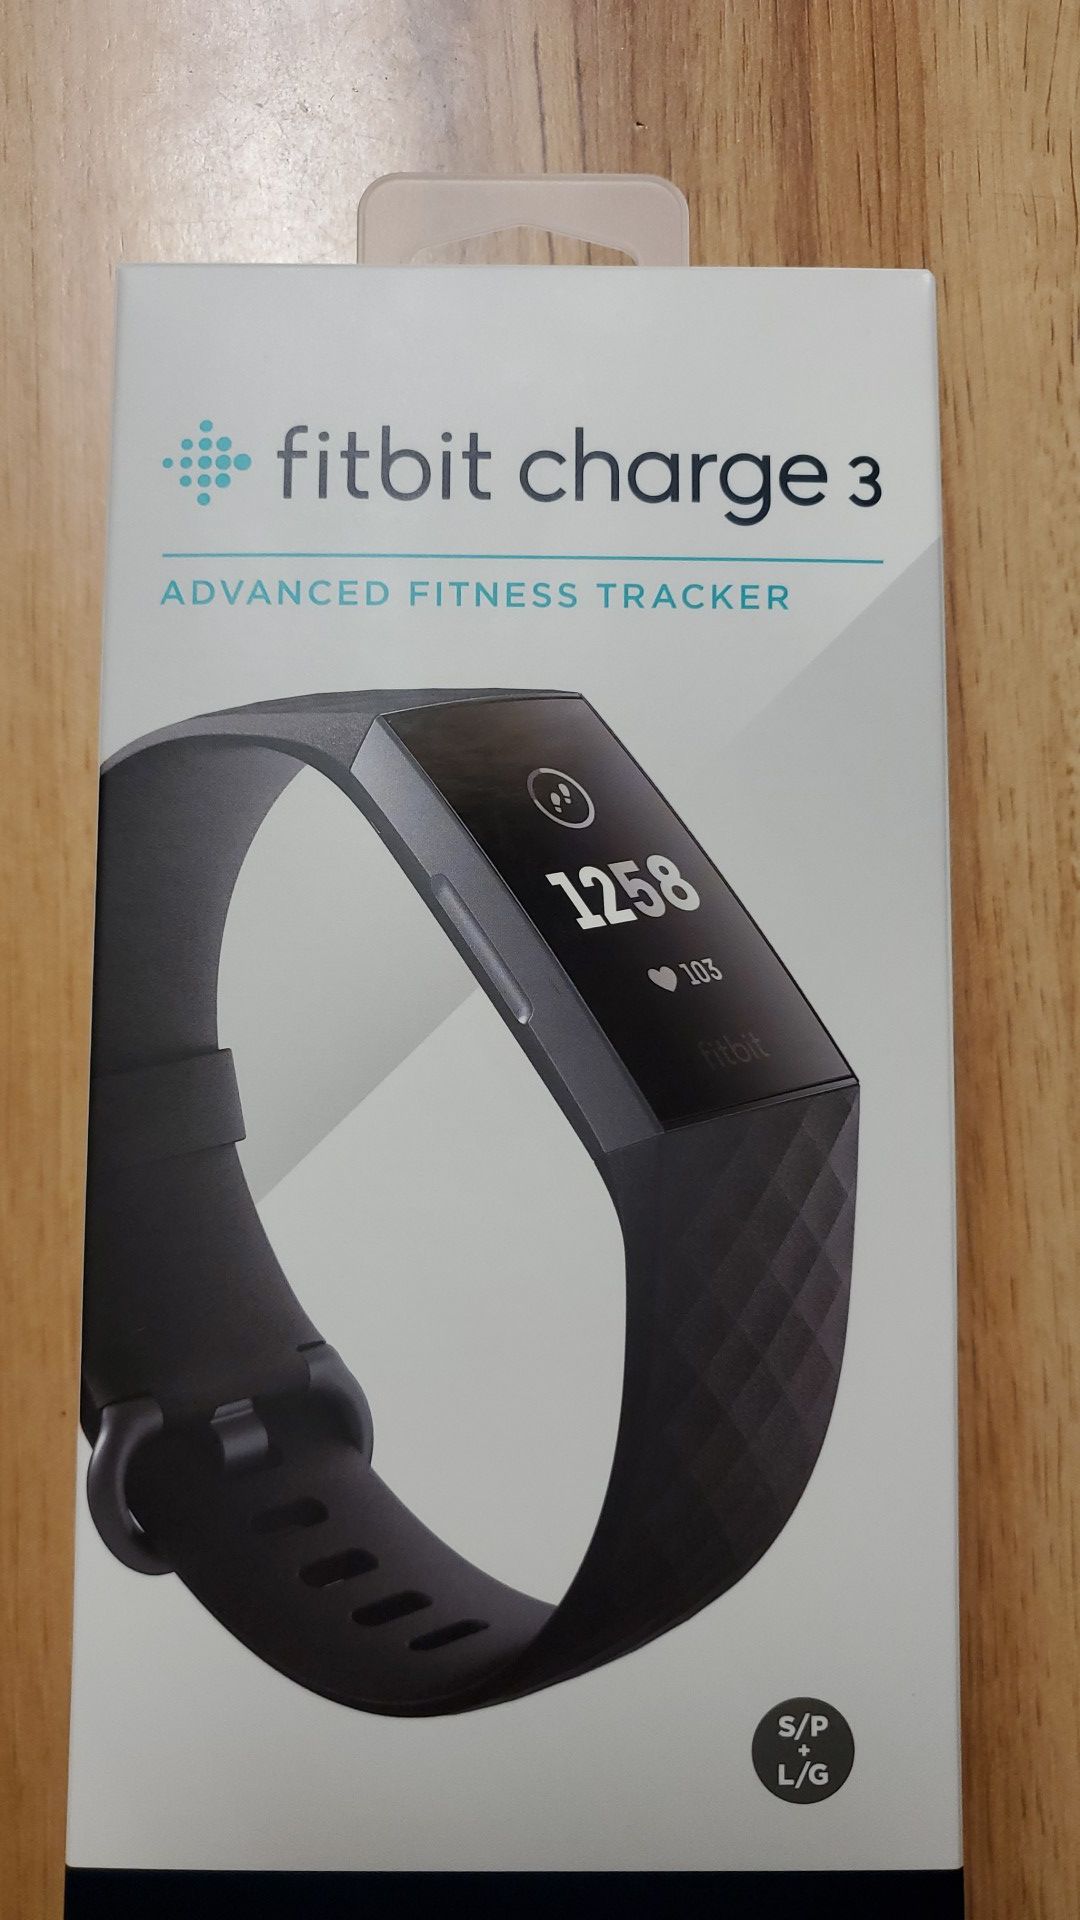 New Fitbit charge 3